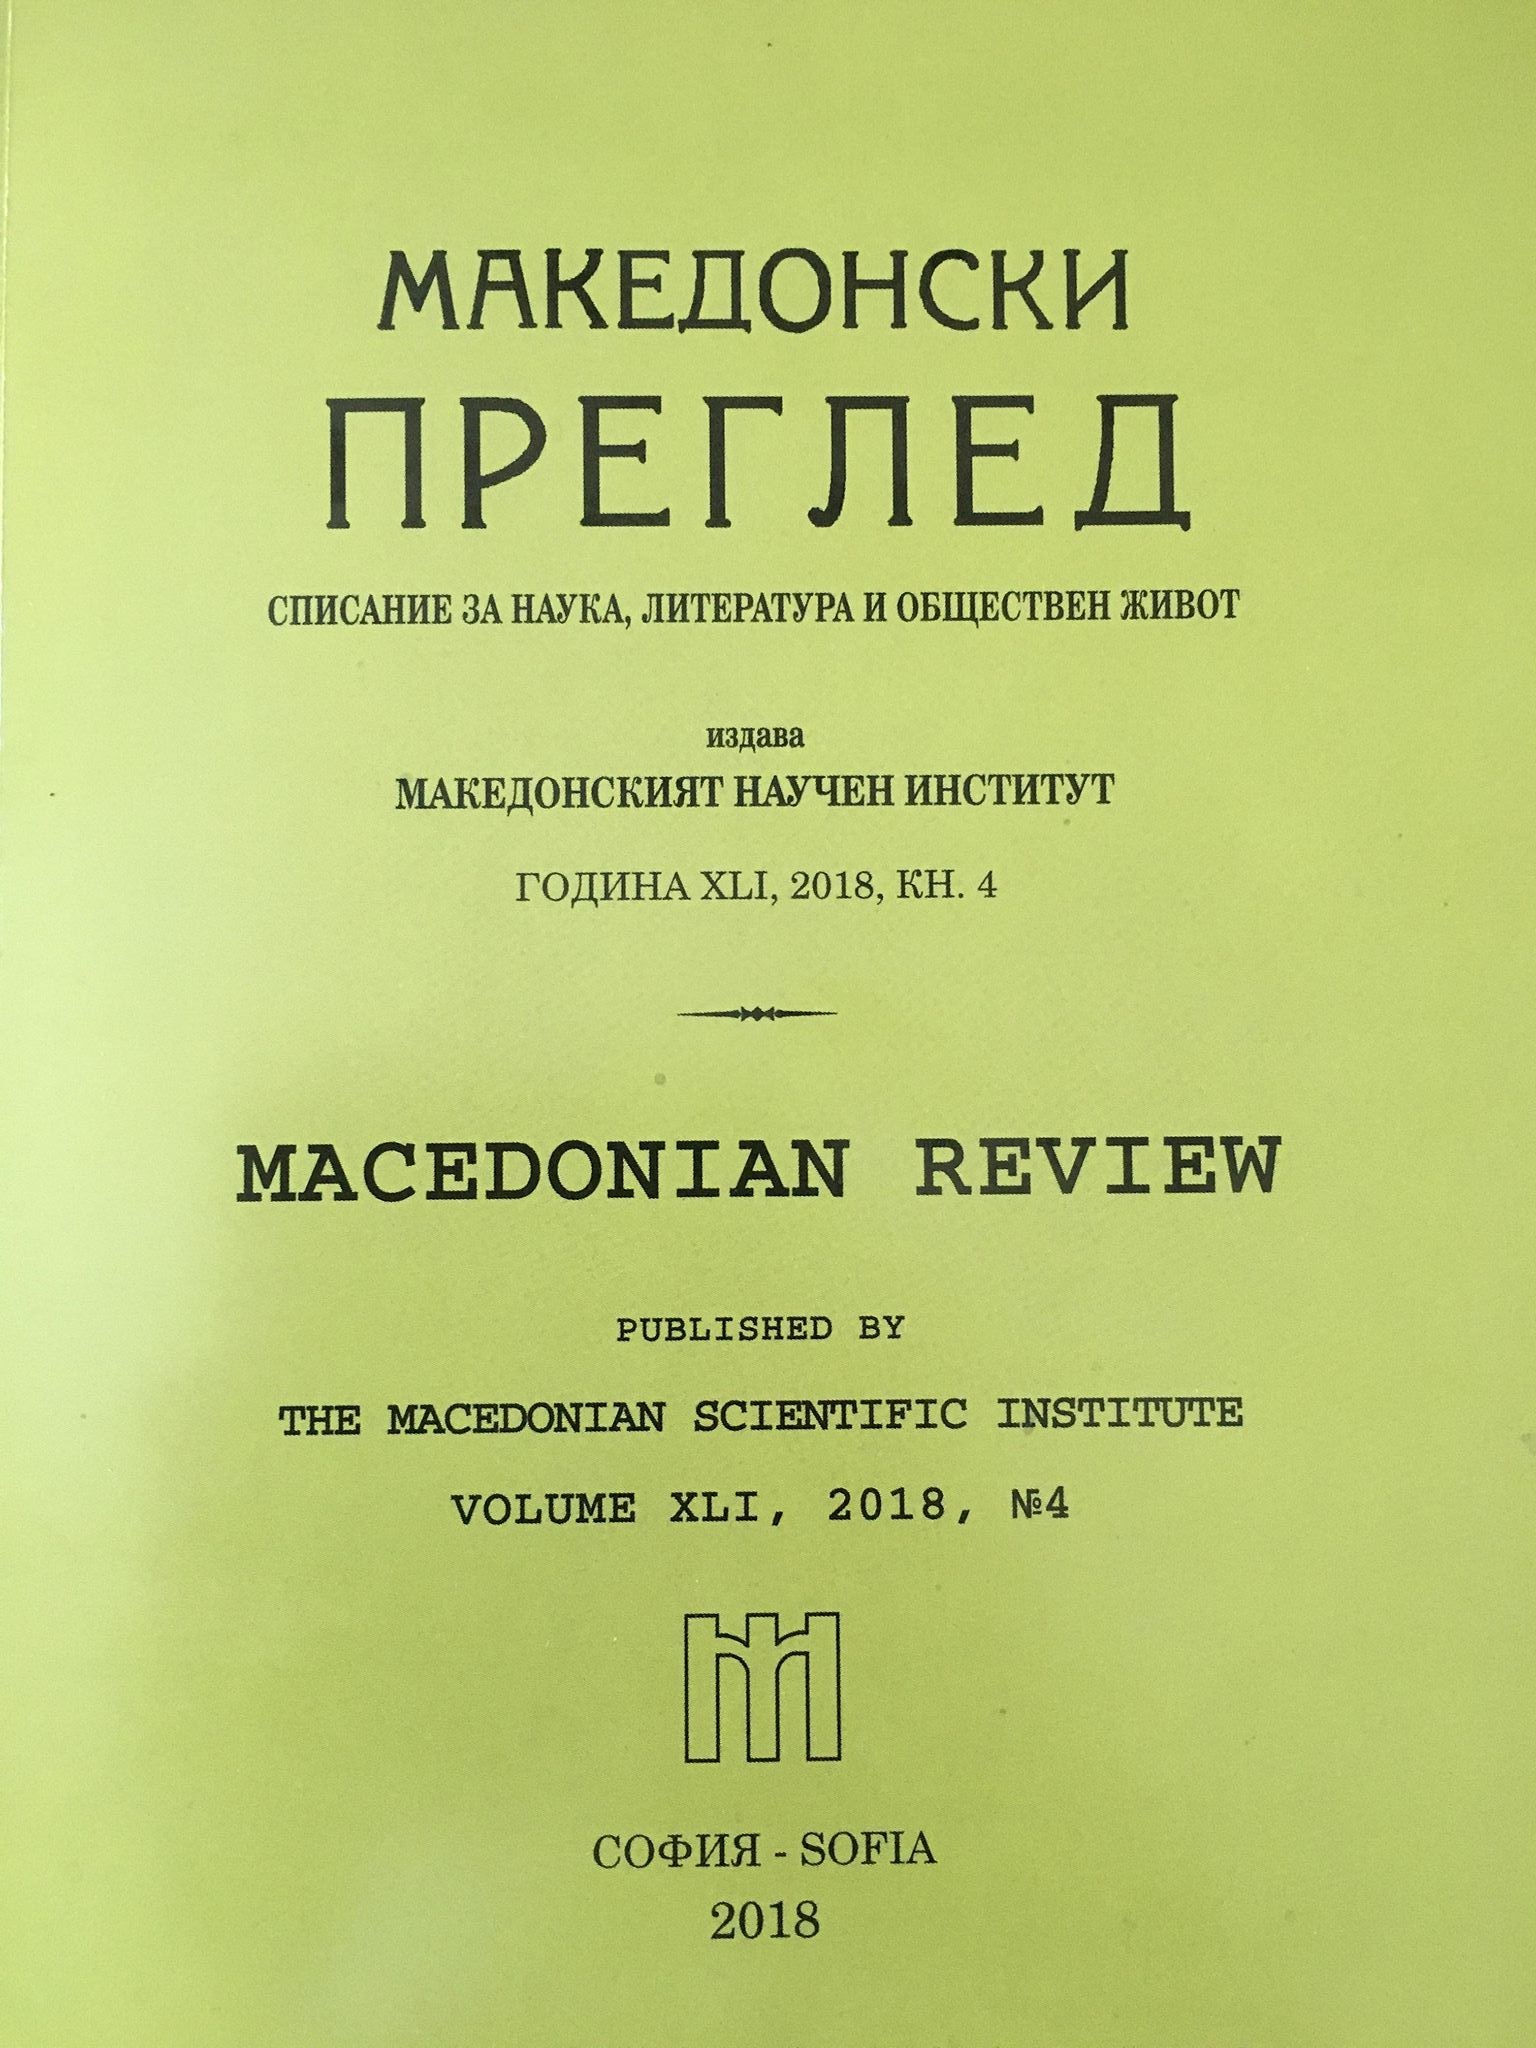 [D. O. Labauri. Gospel and Revolver. Social and Psychological Foundations of the Bulgarian National Revolution in Macedonia and Thrace in the End of the 19th – the Beginning of the 20th Century. St. Petersburg, Нестор – История, 2018, 328 p. ] Cover Image